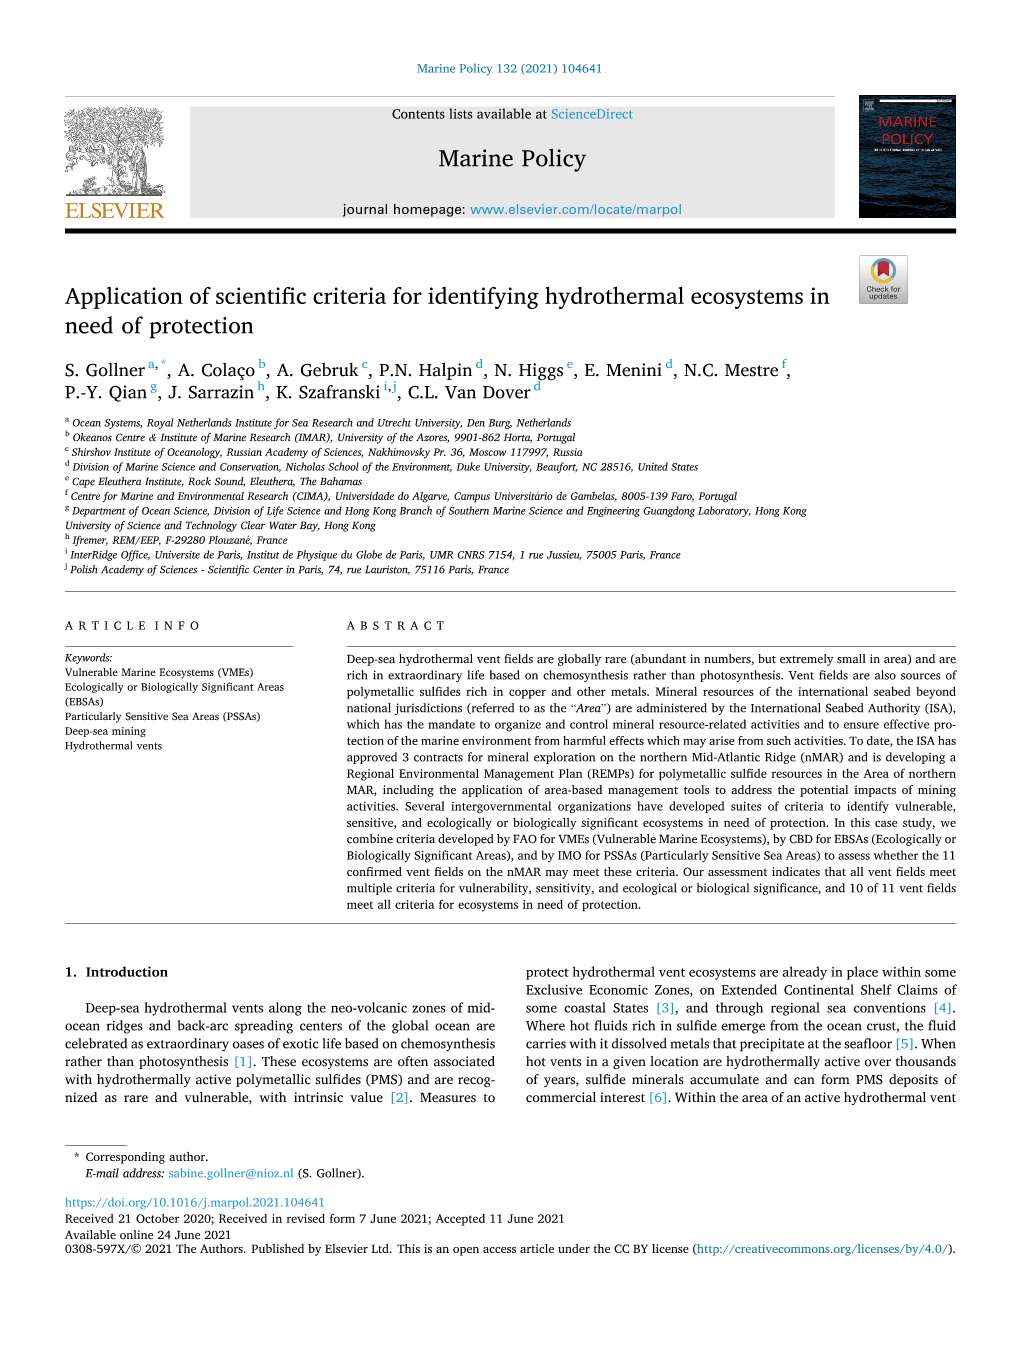 Application of Scientific Criteria for Identifying Hydrothermal